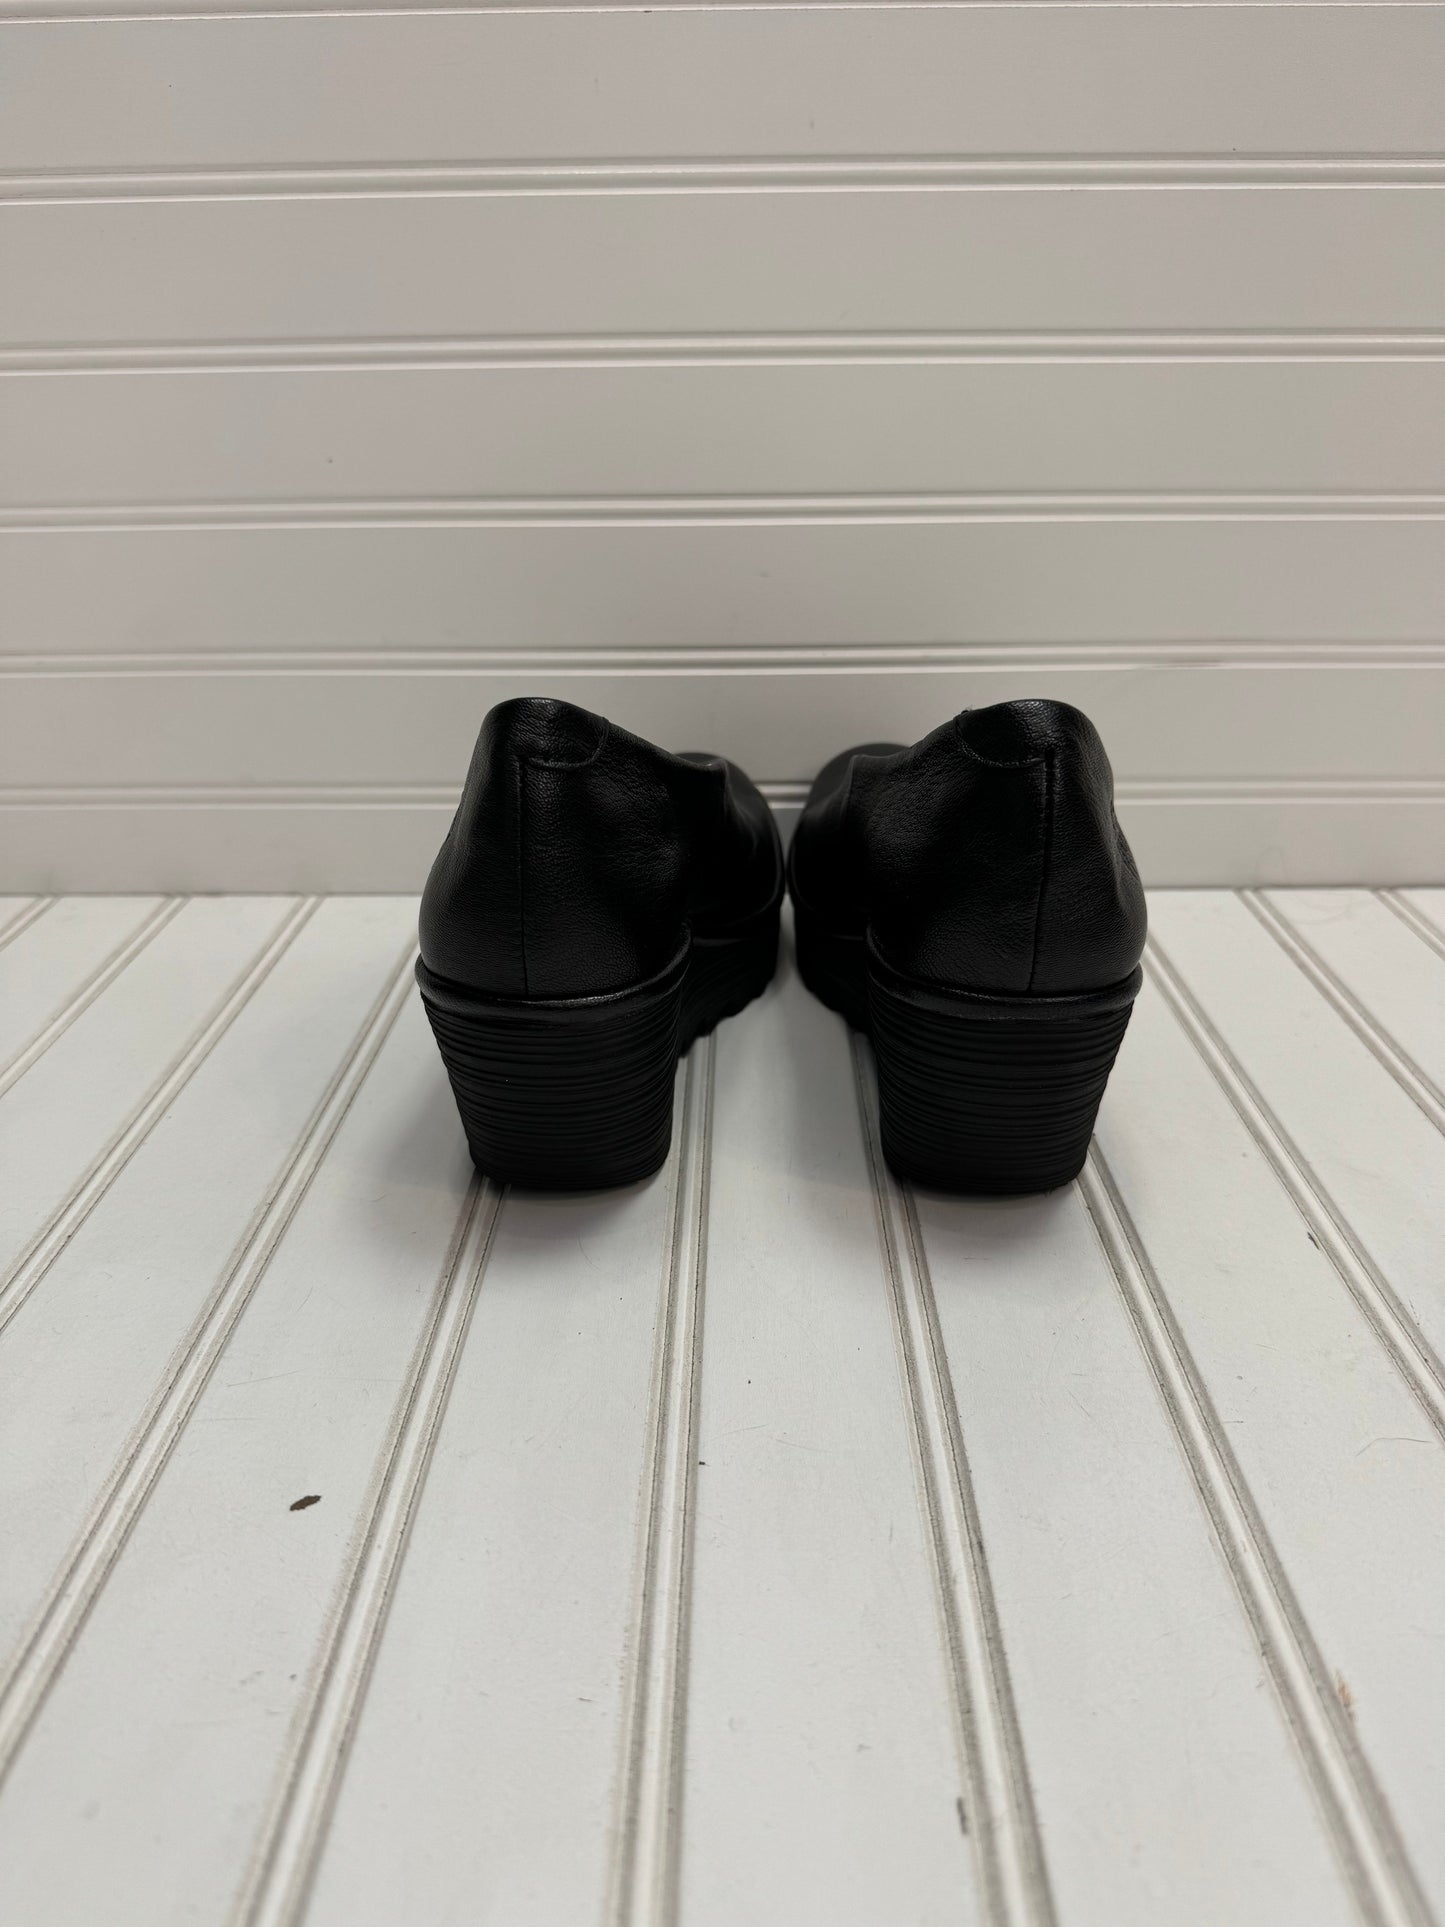 Black Shoes Heels Wedge Fly London, Size 6.5